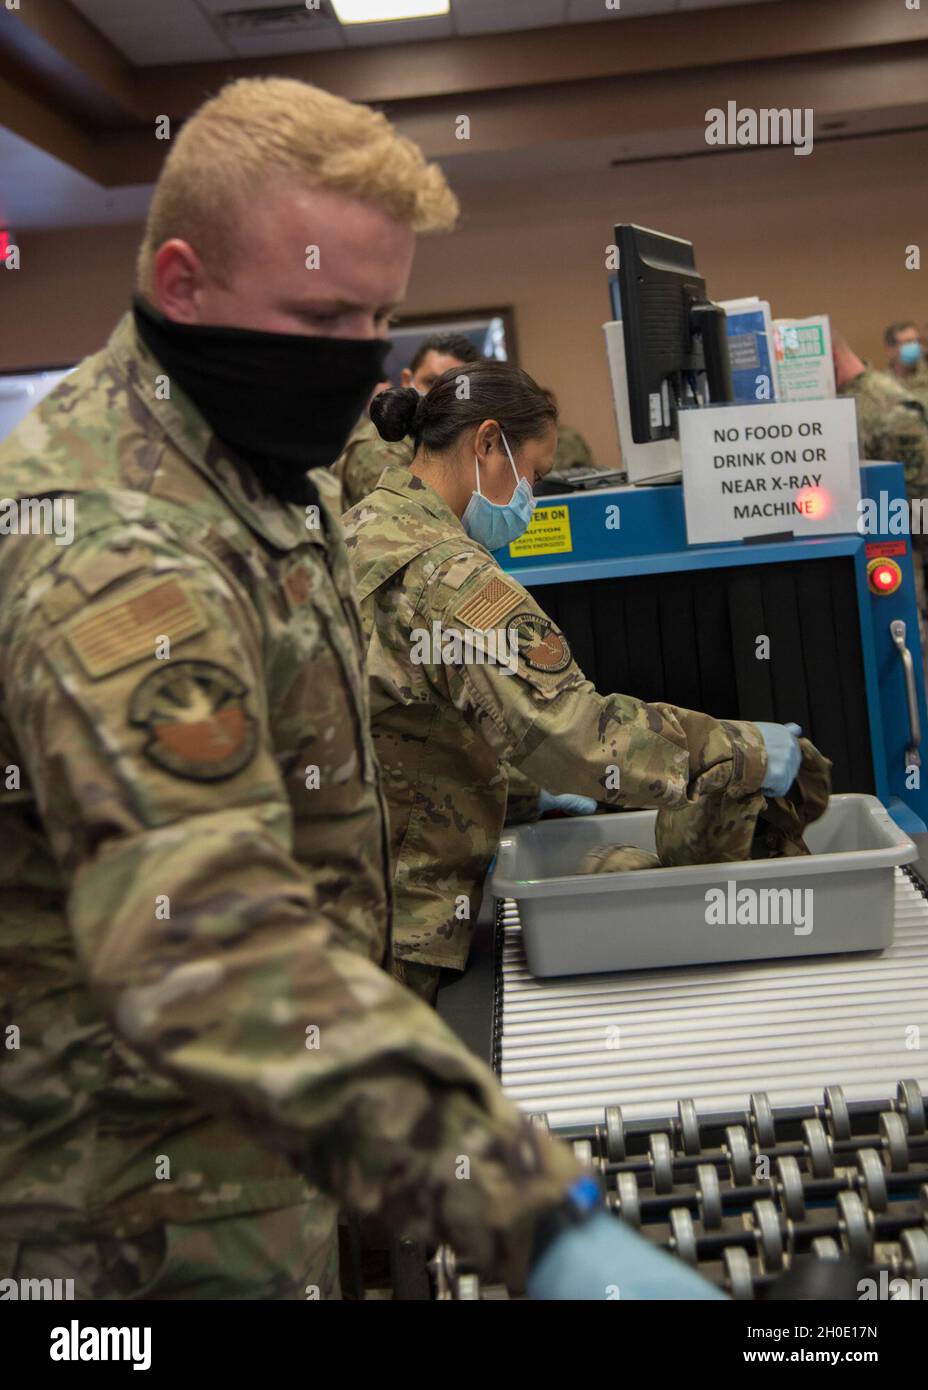 Members of the Arizona National Guard’s 161st Logistic Readiness Squadron inspect equipment at a pre-flight security checkpoint during a mobilization exercise at the Goldwater Air National Guard Base in Phoenix, Arizona Feb. 5, 2021. This exercise demonstrated the joint readiness capability of the Arizona Army and Air National Guard to mobilize domestic response capabilities on short notice. Stock Photo